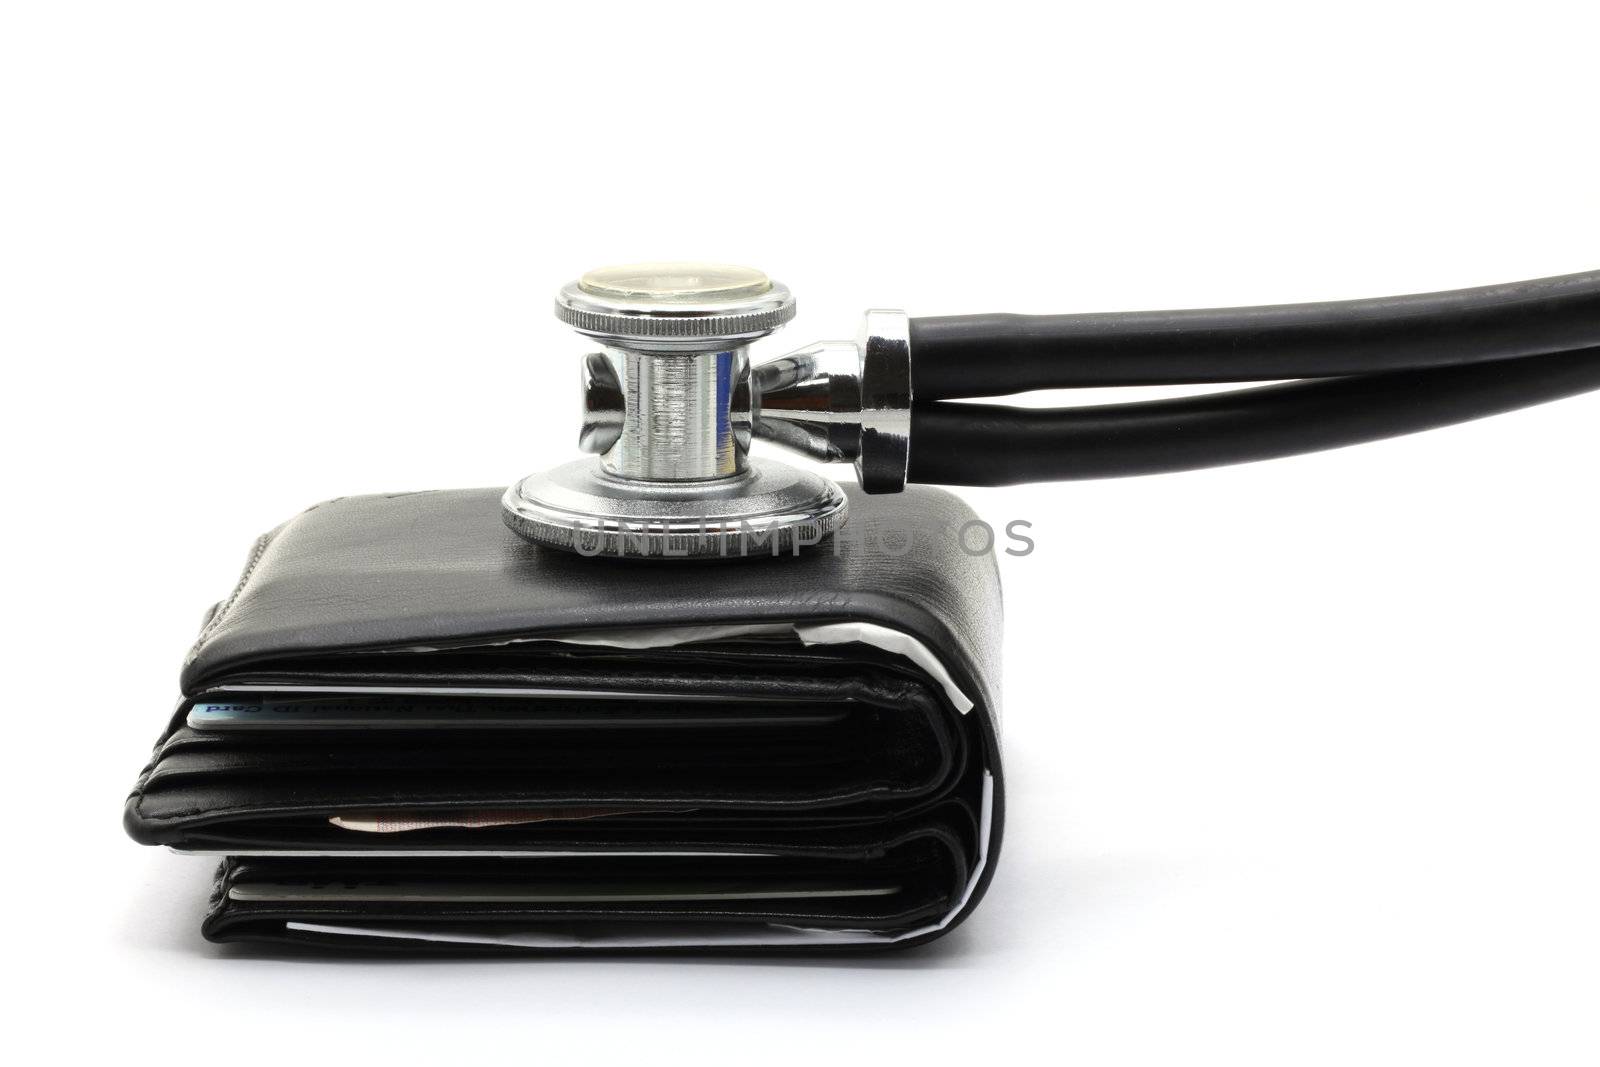 diagnose finance situation with stethoscope and cash wallet